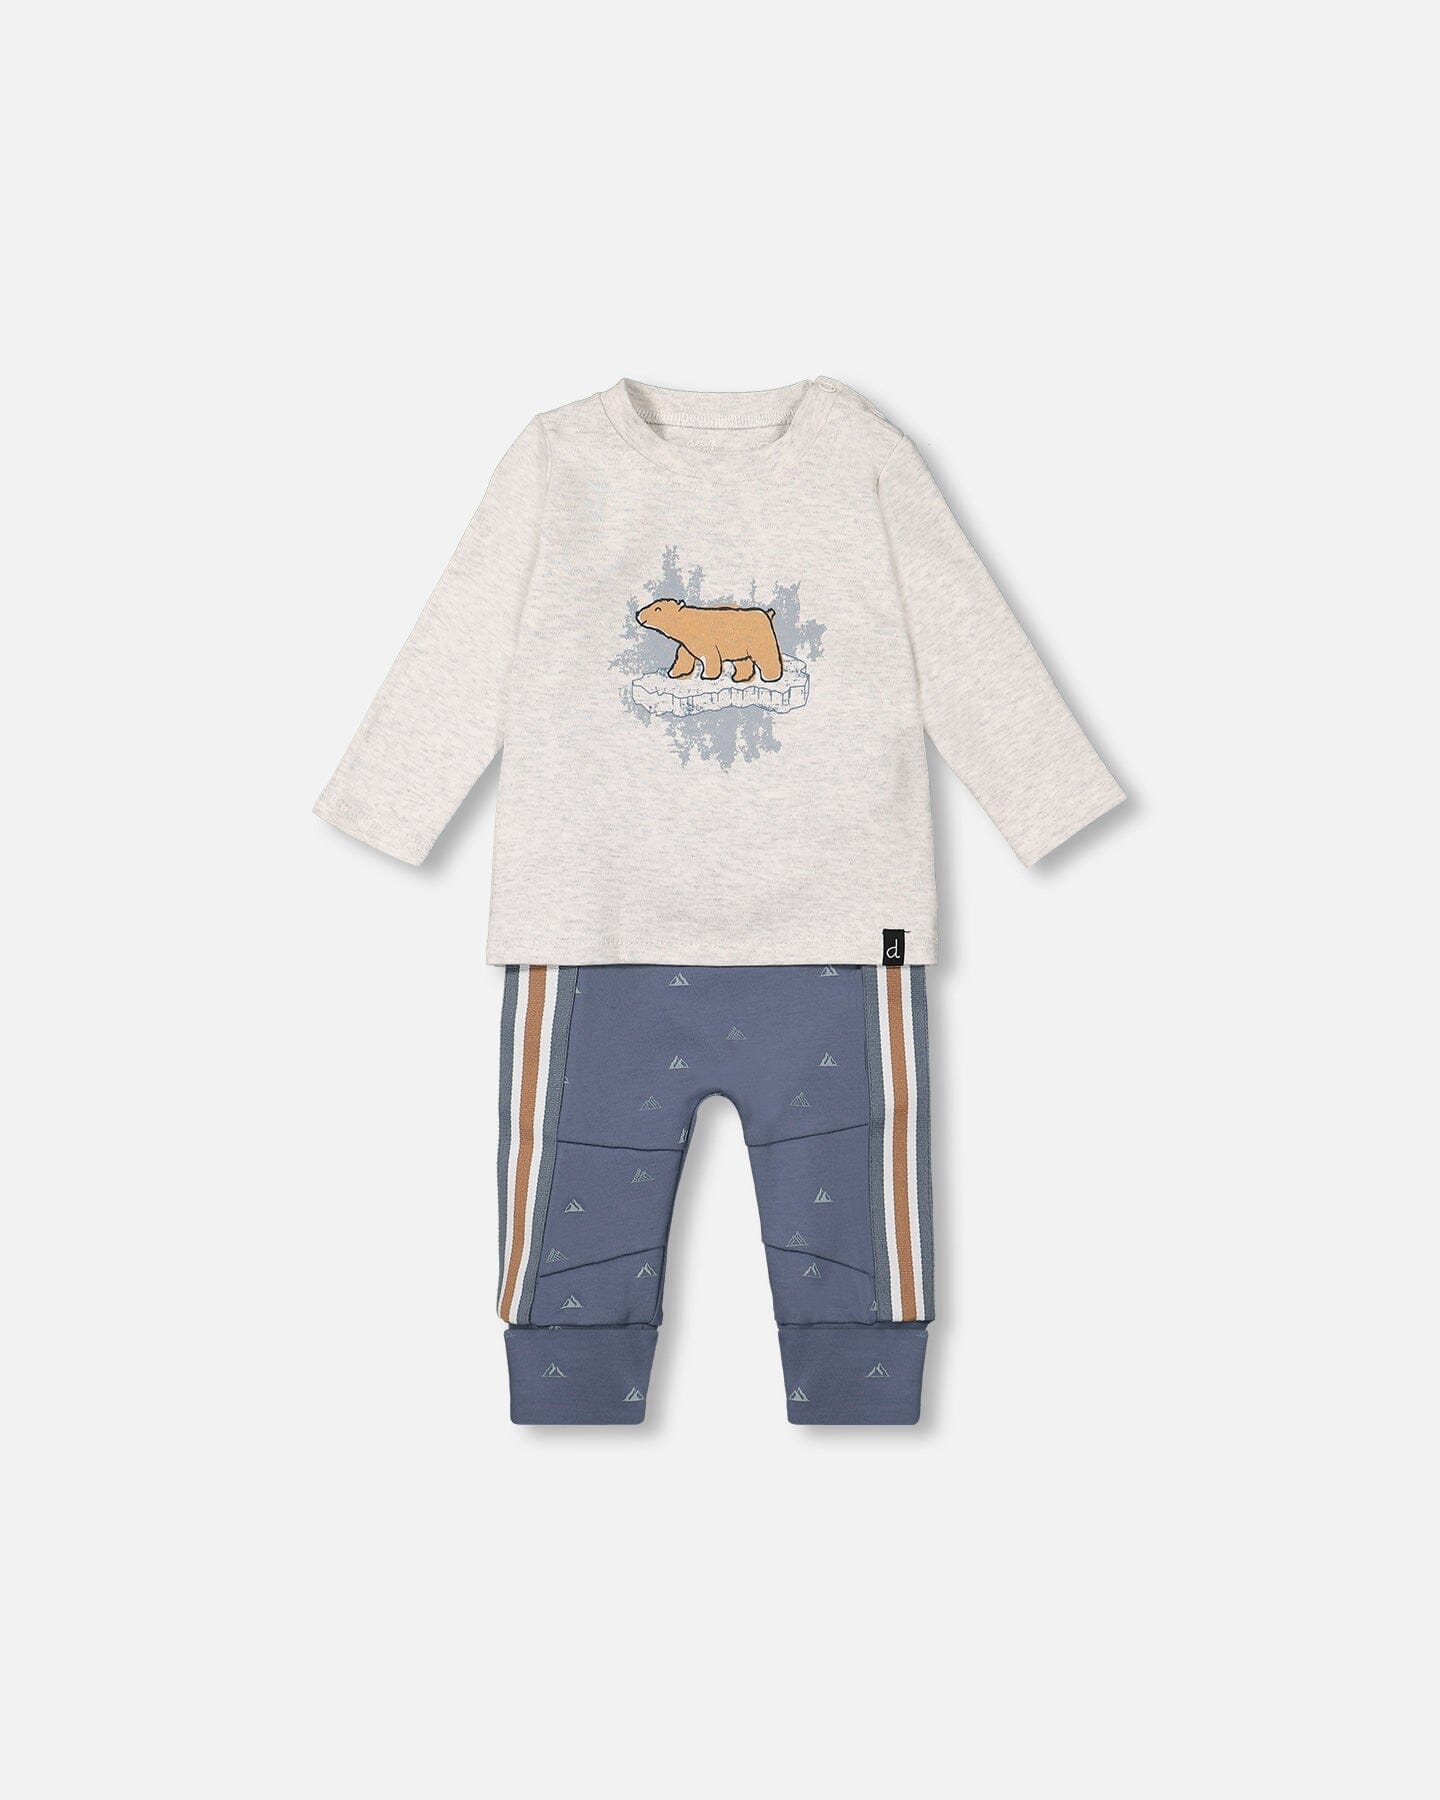 Organic Cotton Top And Grow-With-Me Pants Set Oatmeal And French Navy Little Mountains Print - F20D12_193